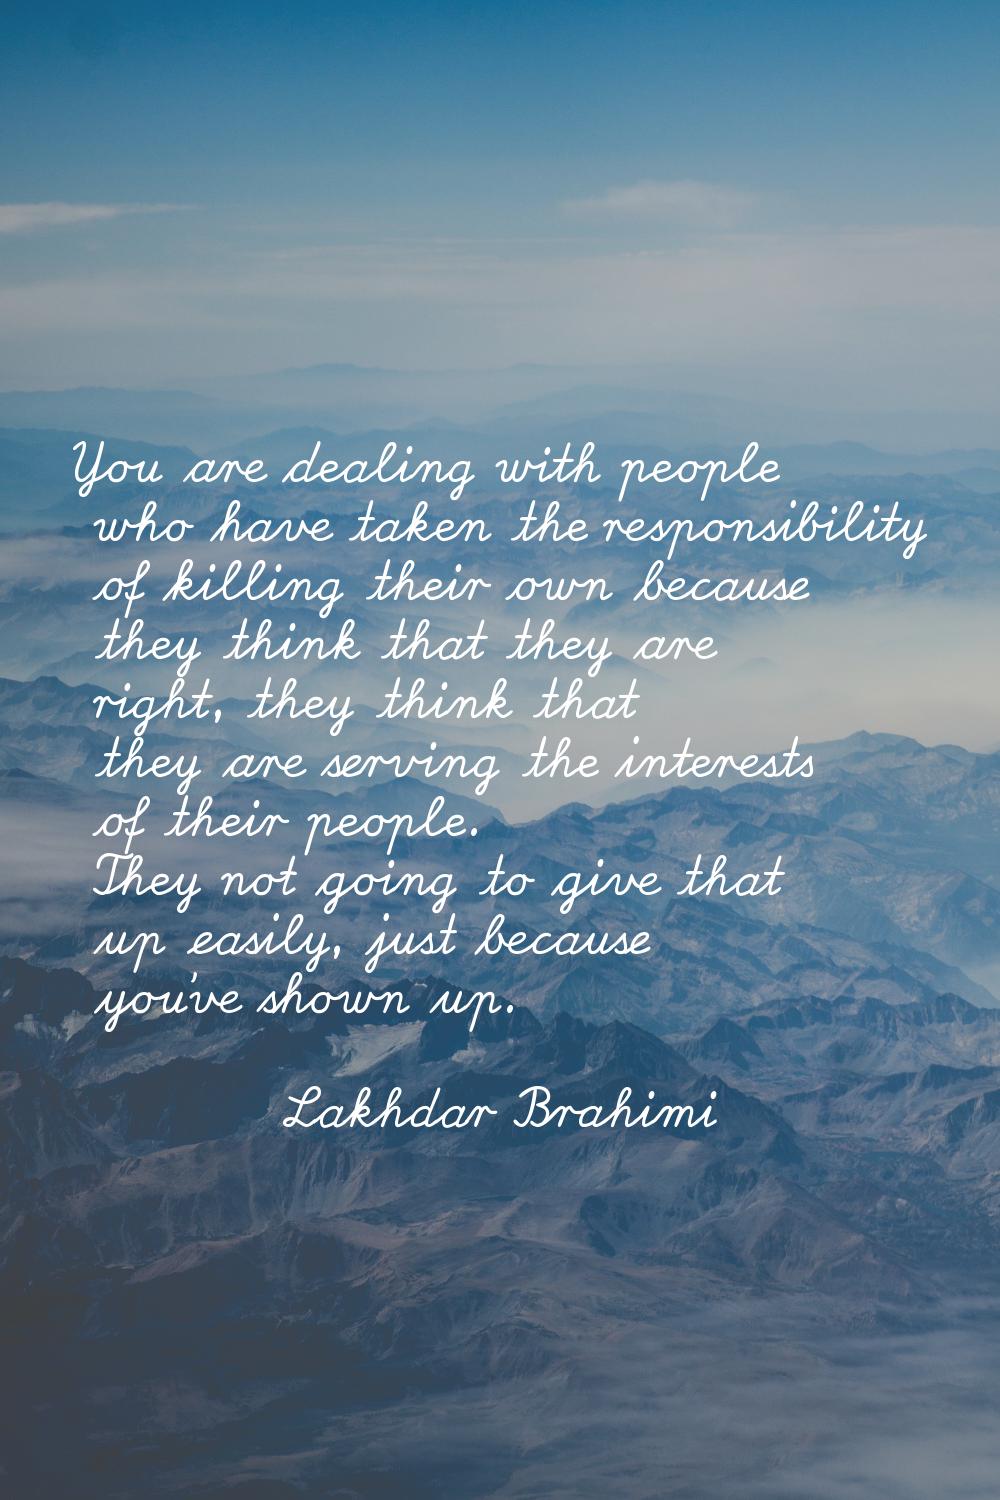 You are dealing with people who have taken the responsibility of killing their own because they thi